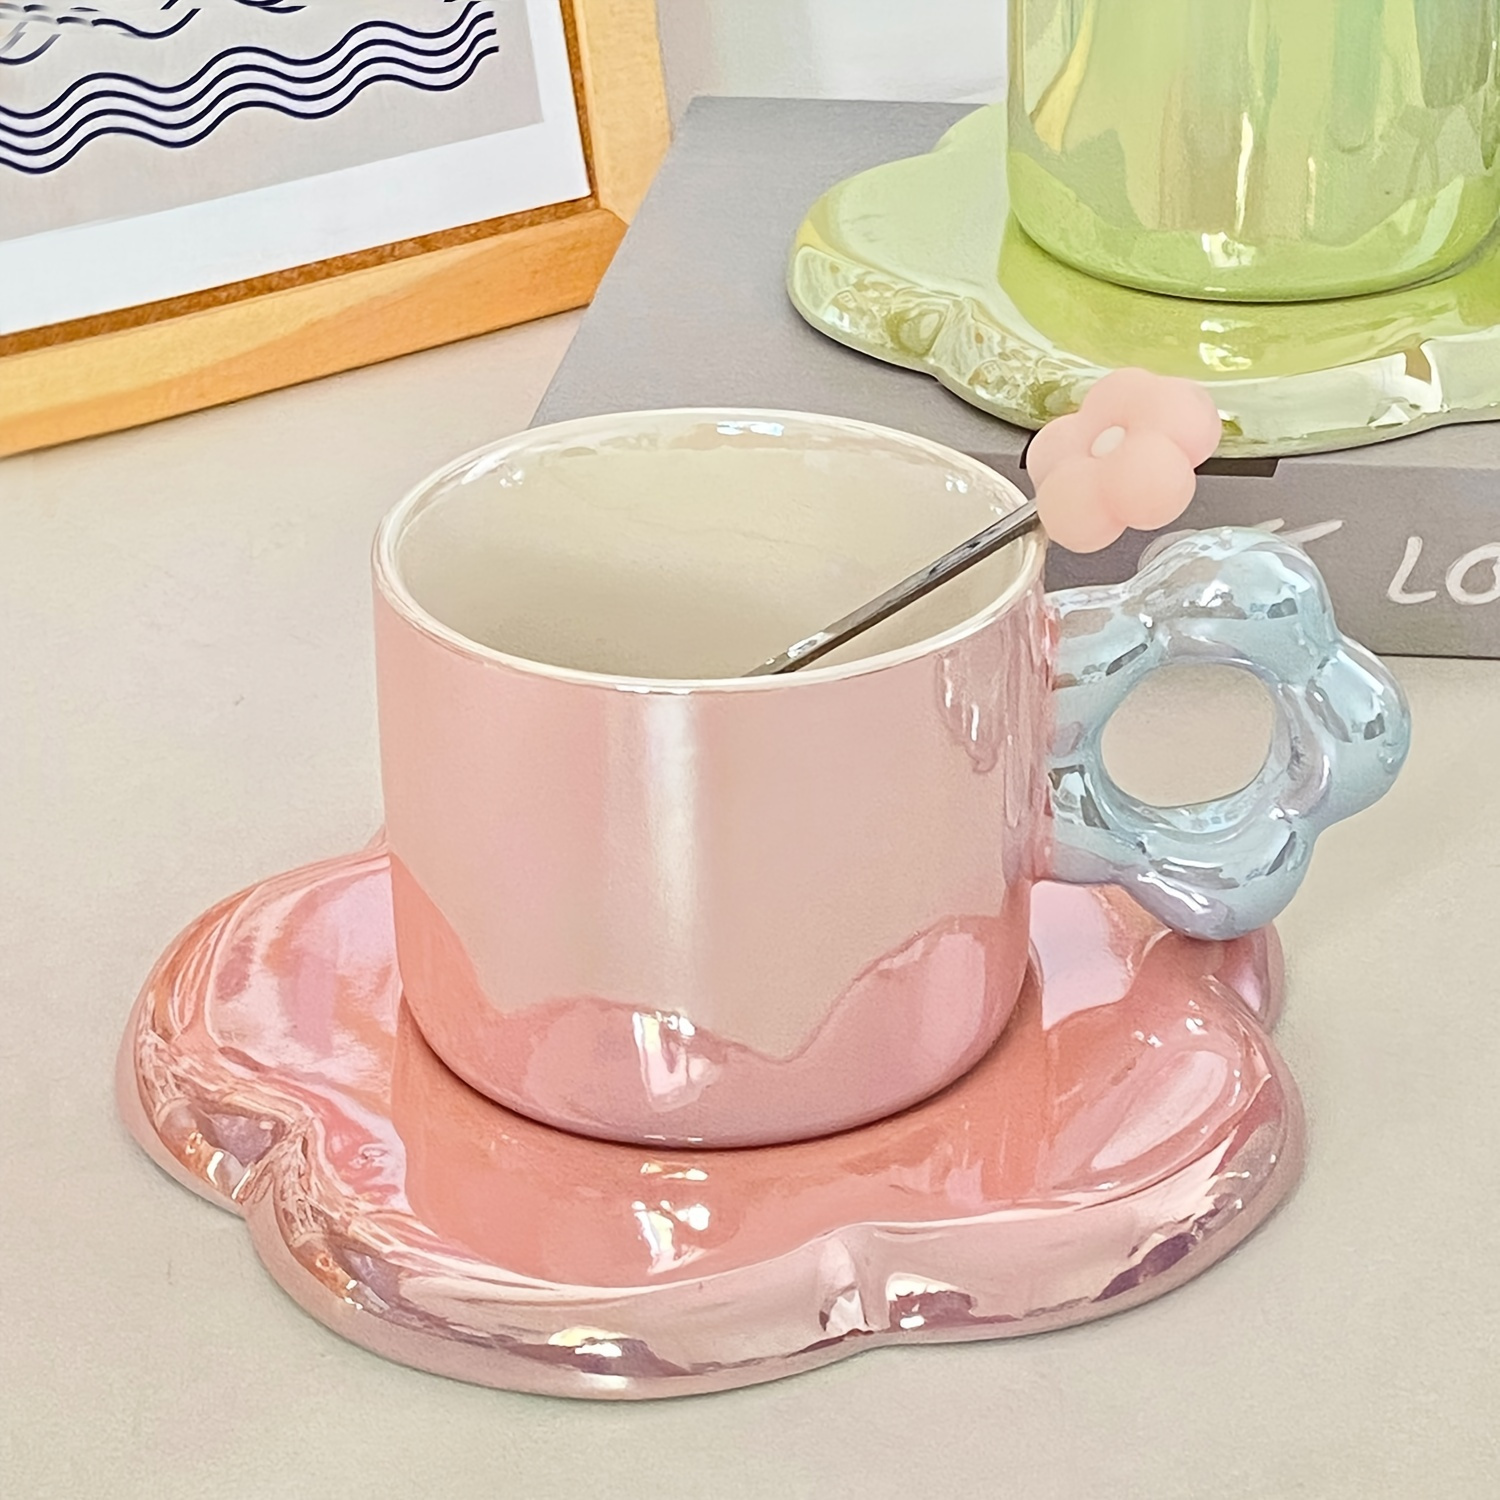 Cups Shiny Creative Gem Mug Ceramic Water Cup Original Coffee Cup Handle Cup  Gift Mugs Free Shipping Stone Cup Porch Decorations